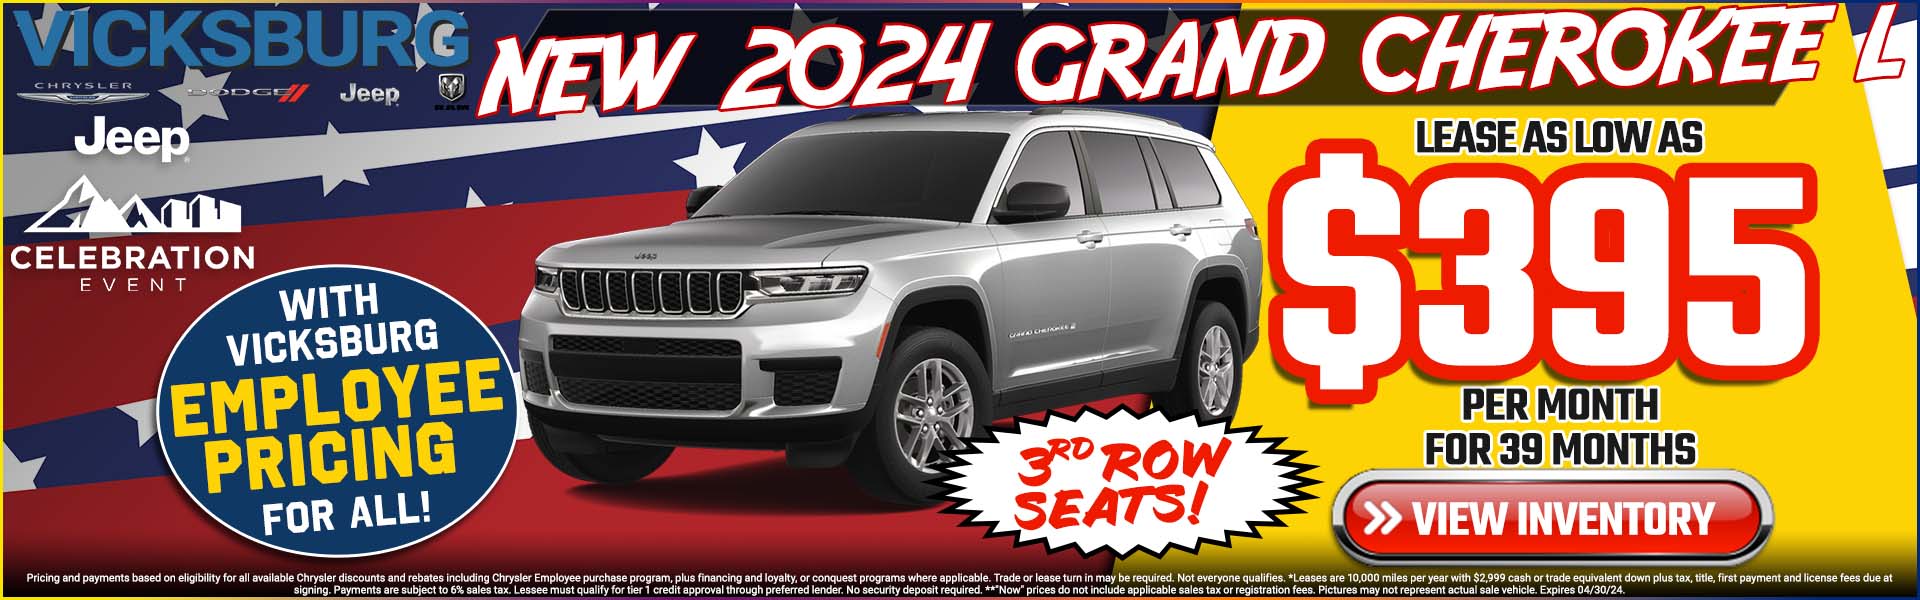  2024 Grand Cherokee L $395 per month for 39 months